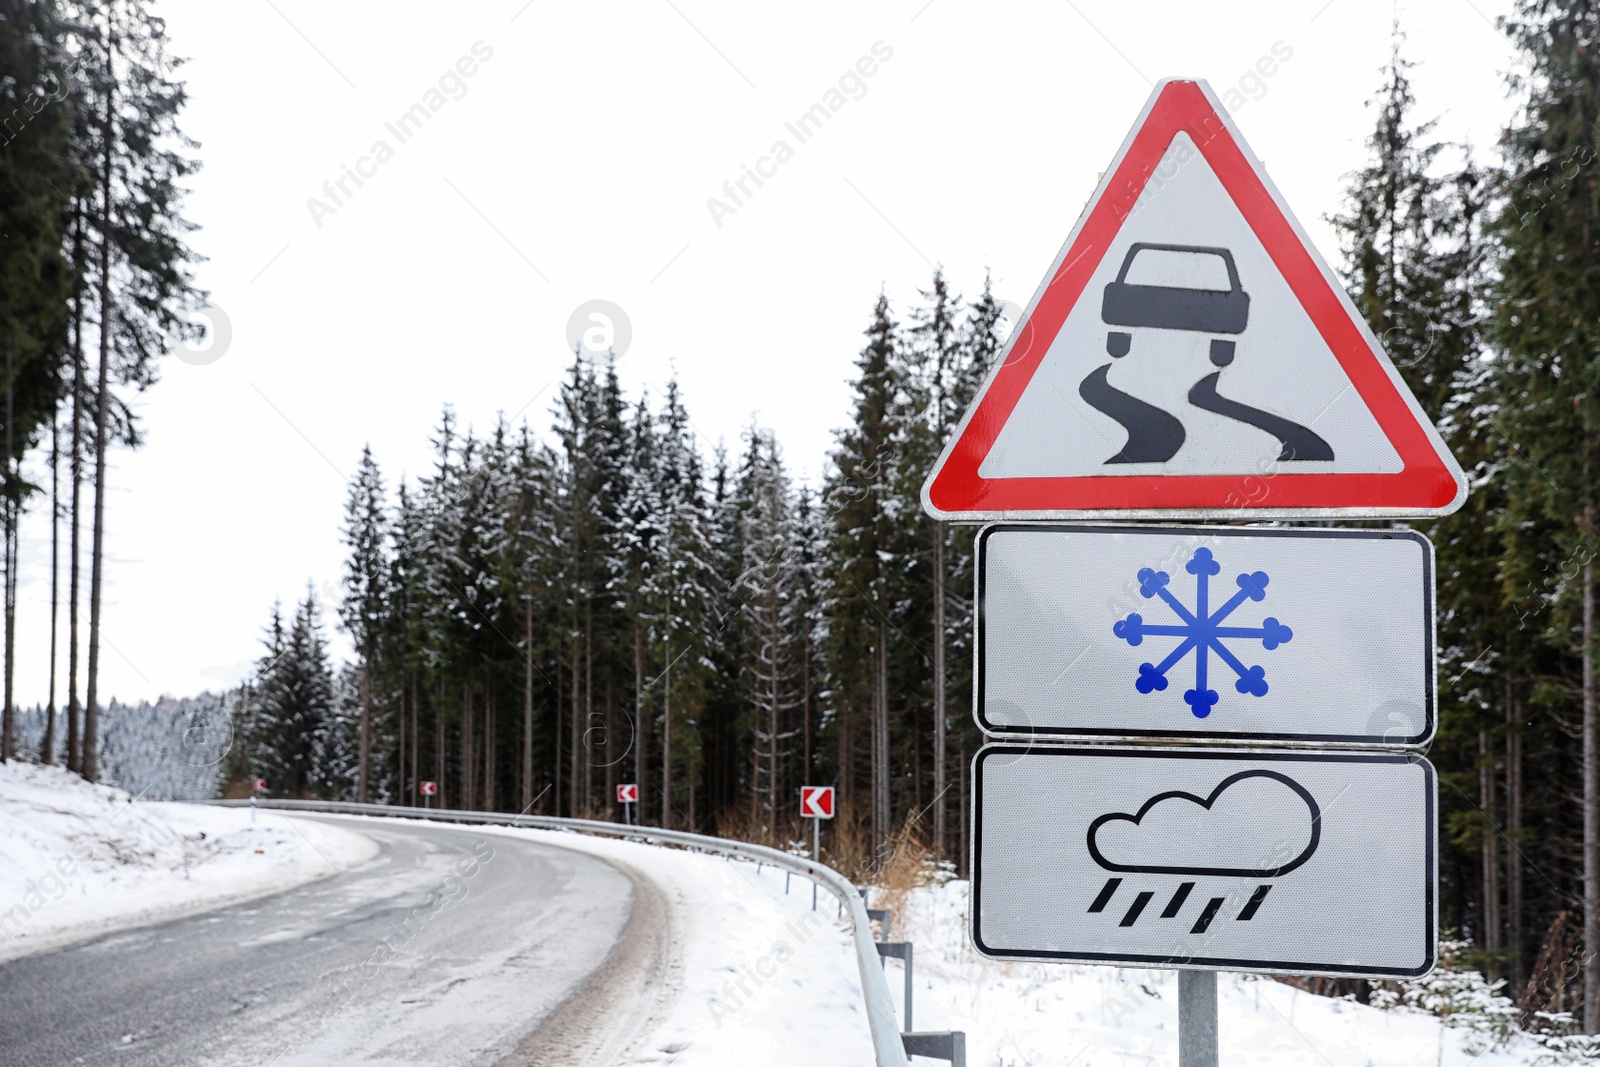 Photo of Warning traffic signs near snowy road through forest. Winter driving